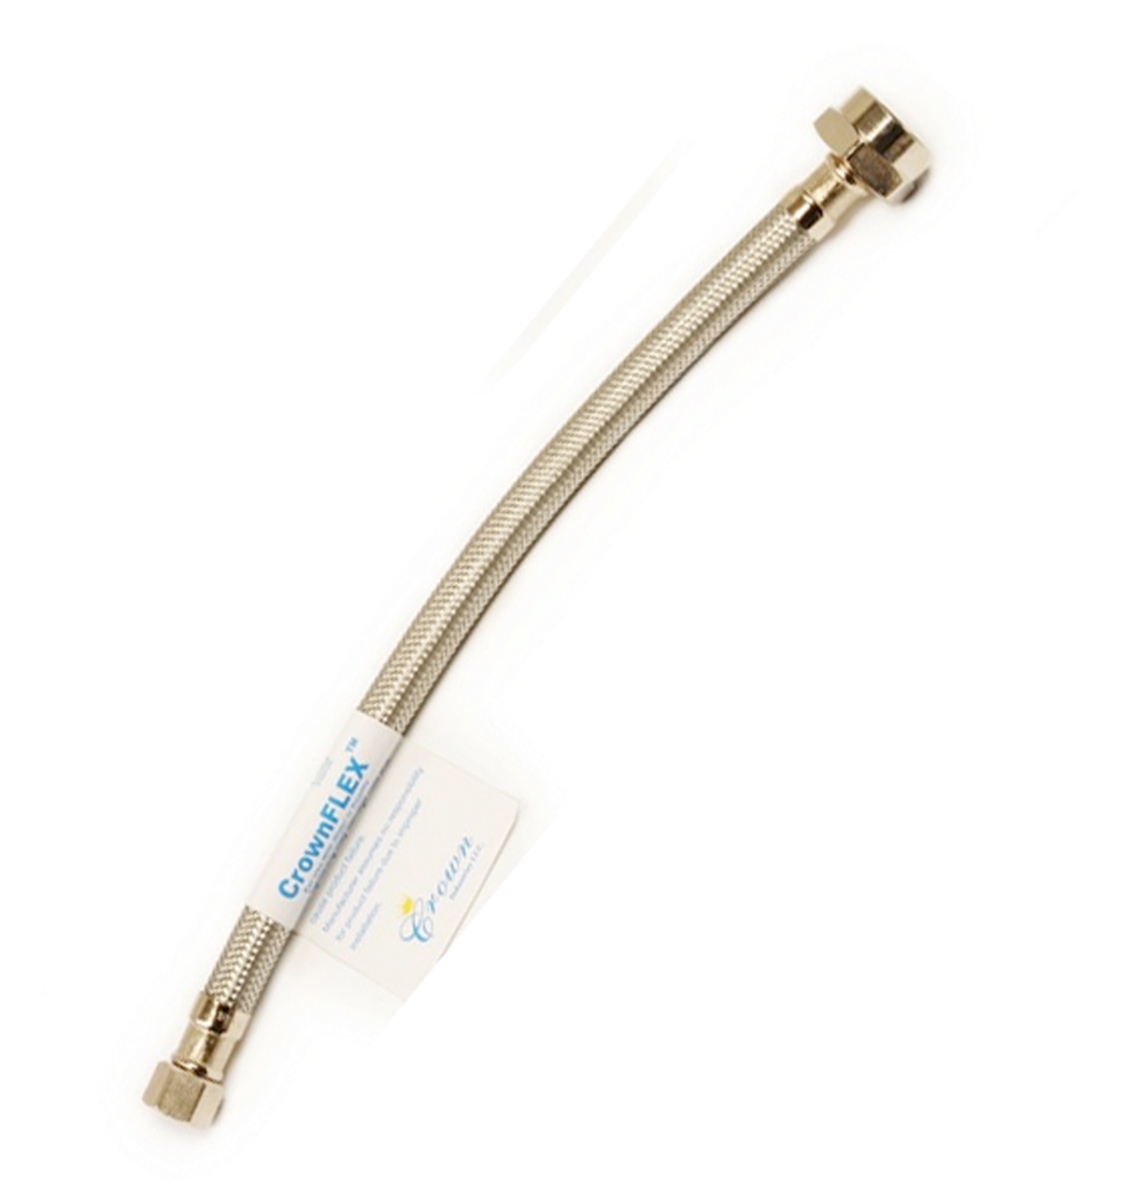 T1638b 0.38 X 16 In. Stainless Steel Toilet Supply Line With Brass Ballcock Nut - 163-30116b